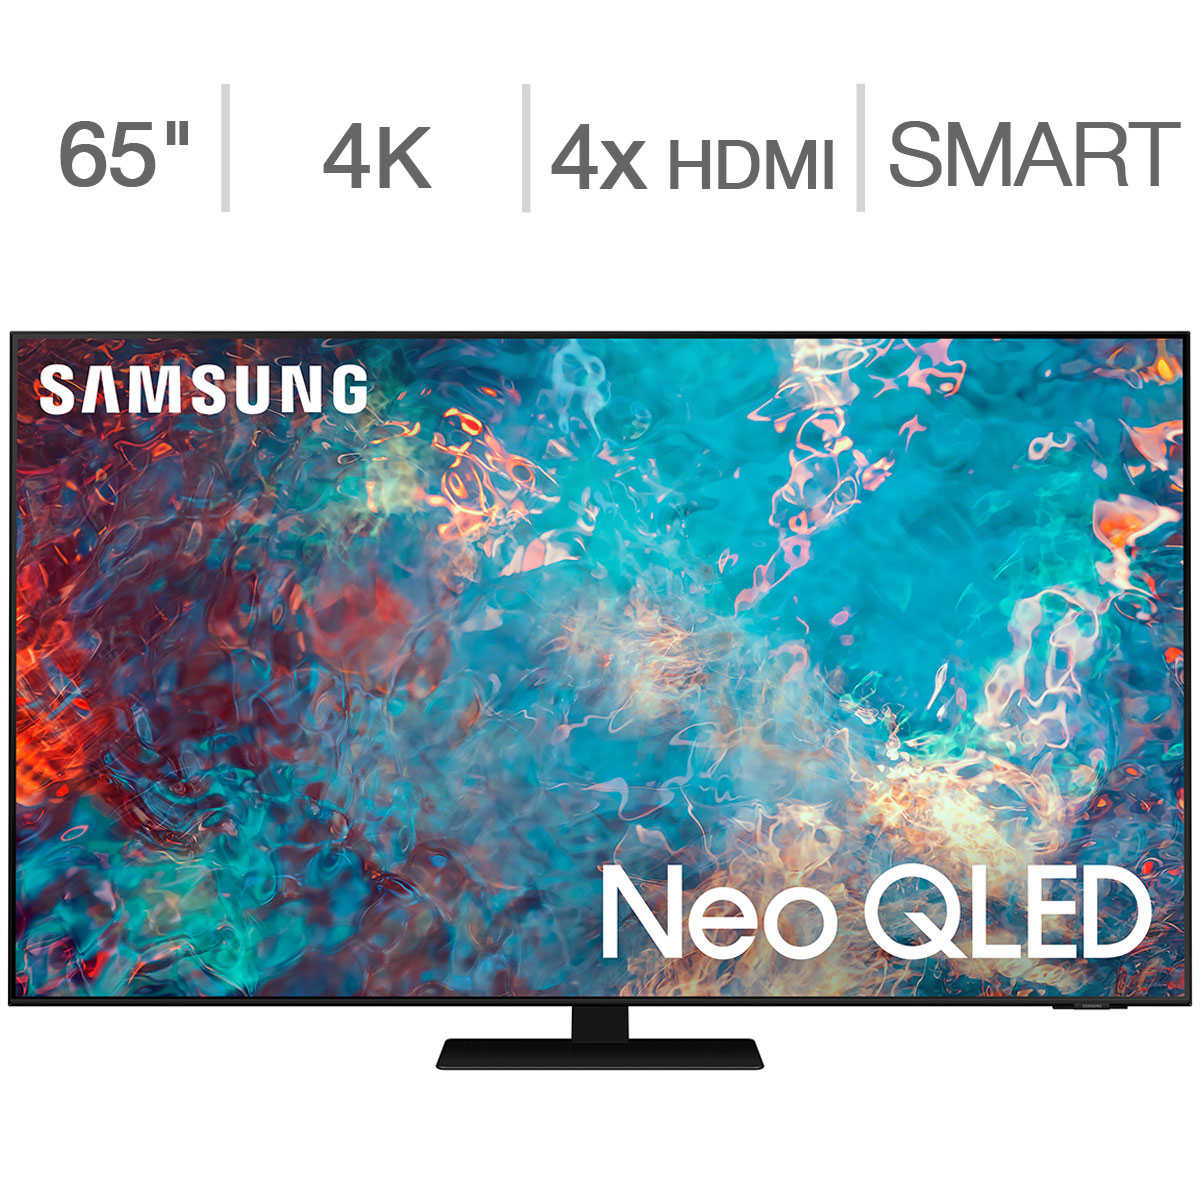 Samsung 65 Class Qn85 Series 4k Uhd Neo Qled Lcd Tv Allstate 3 Year Protection Plan Bundle Included For 5 Years Of Total Coverage Costco